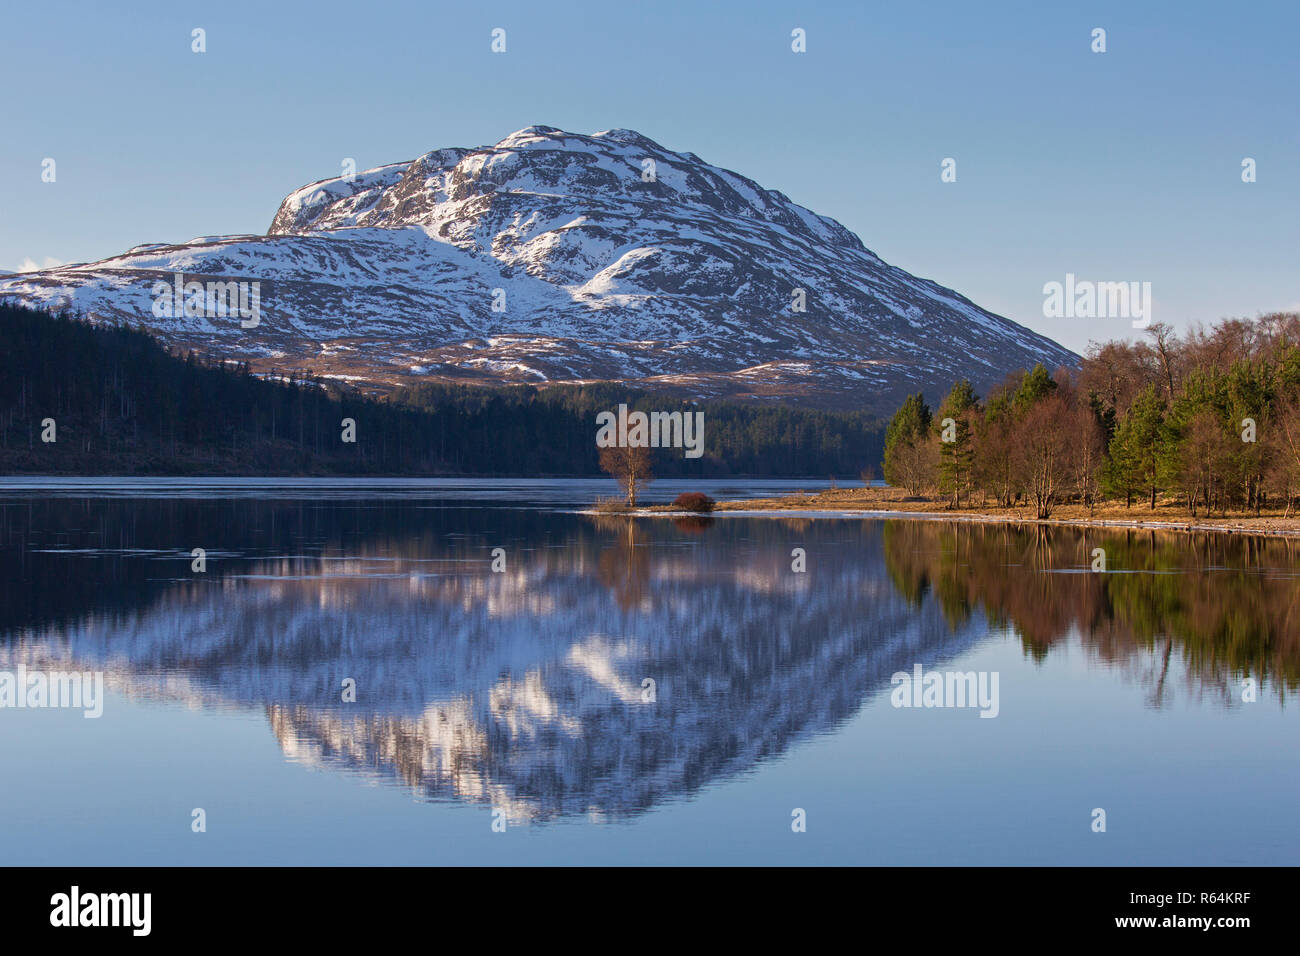 Loch Laggan and snow covered mountain Creag Meagaidh near Dalwhinnie in the Scottish Highlands in winter, Lochaber, Highland, Scotland, UK Stock Photo